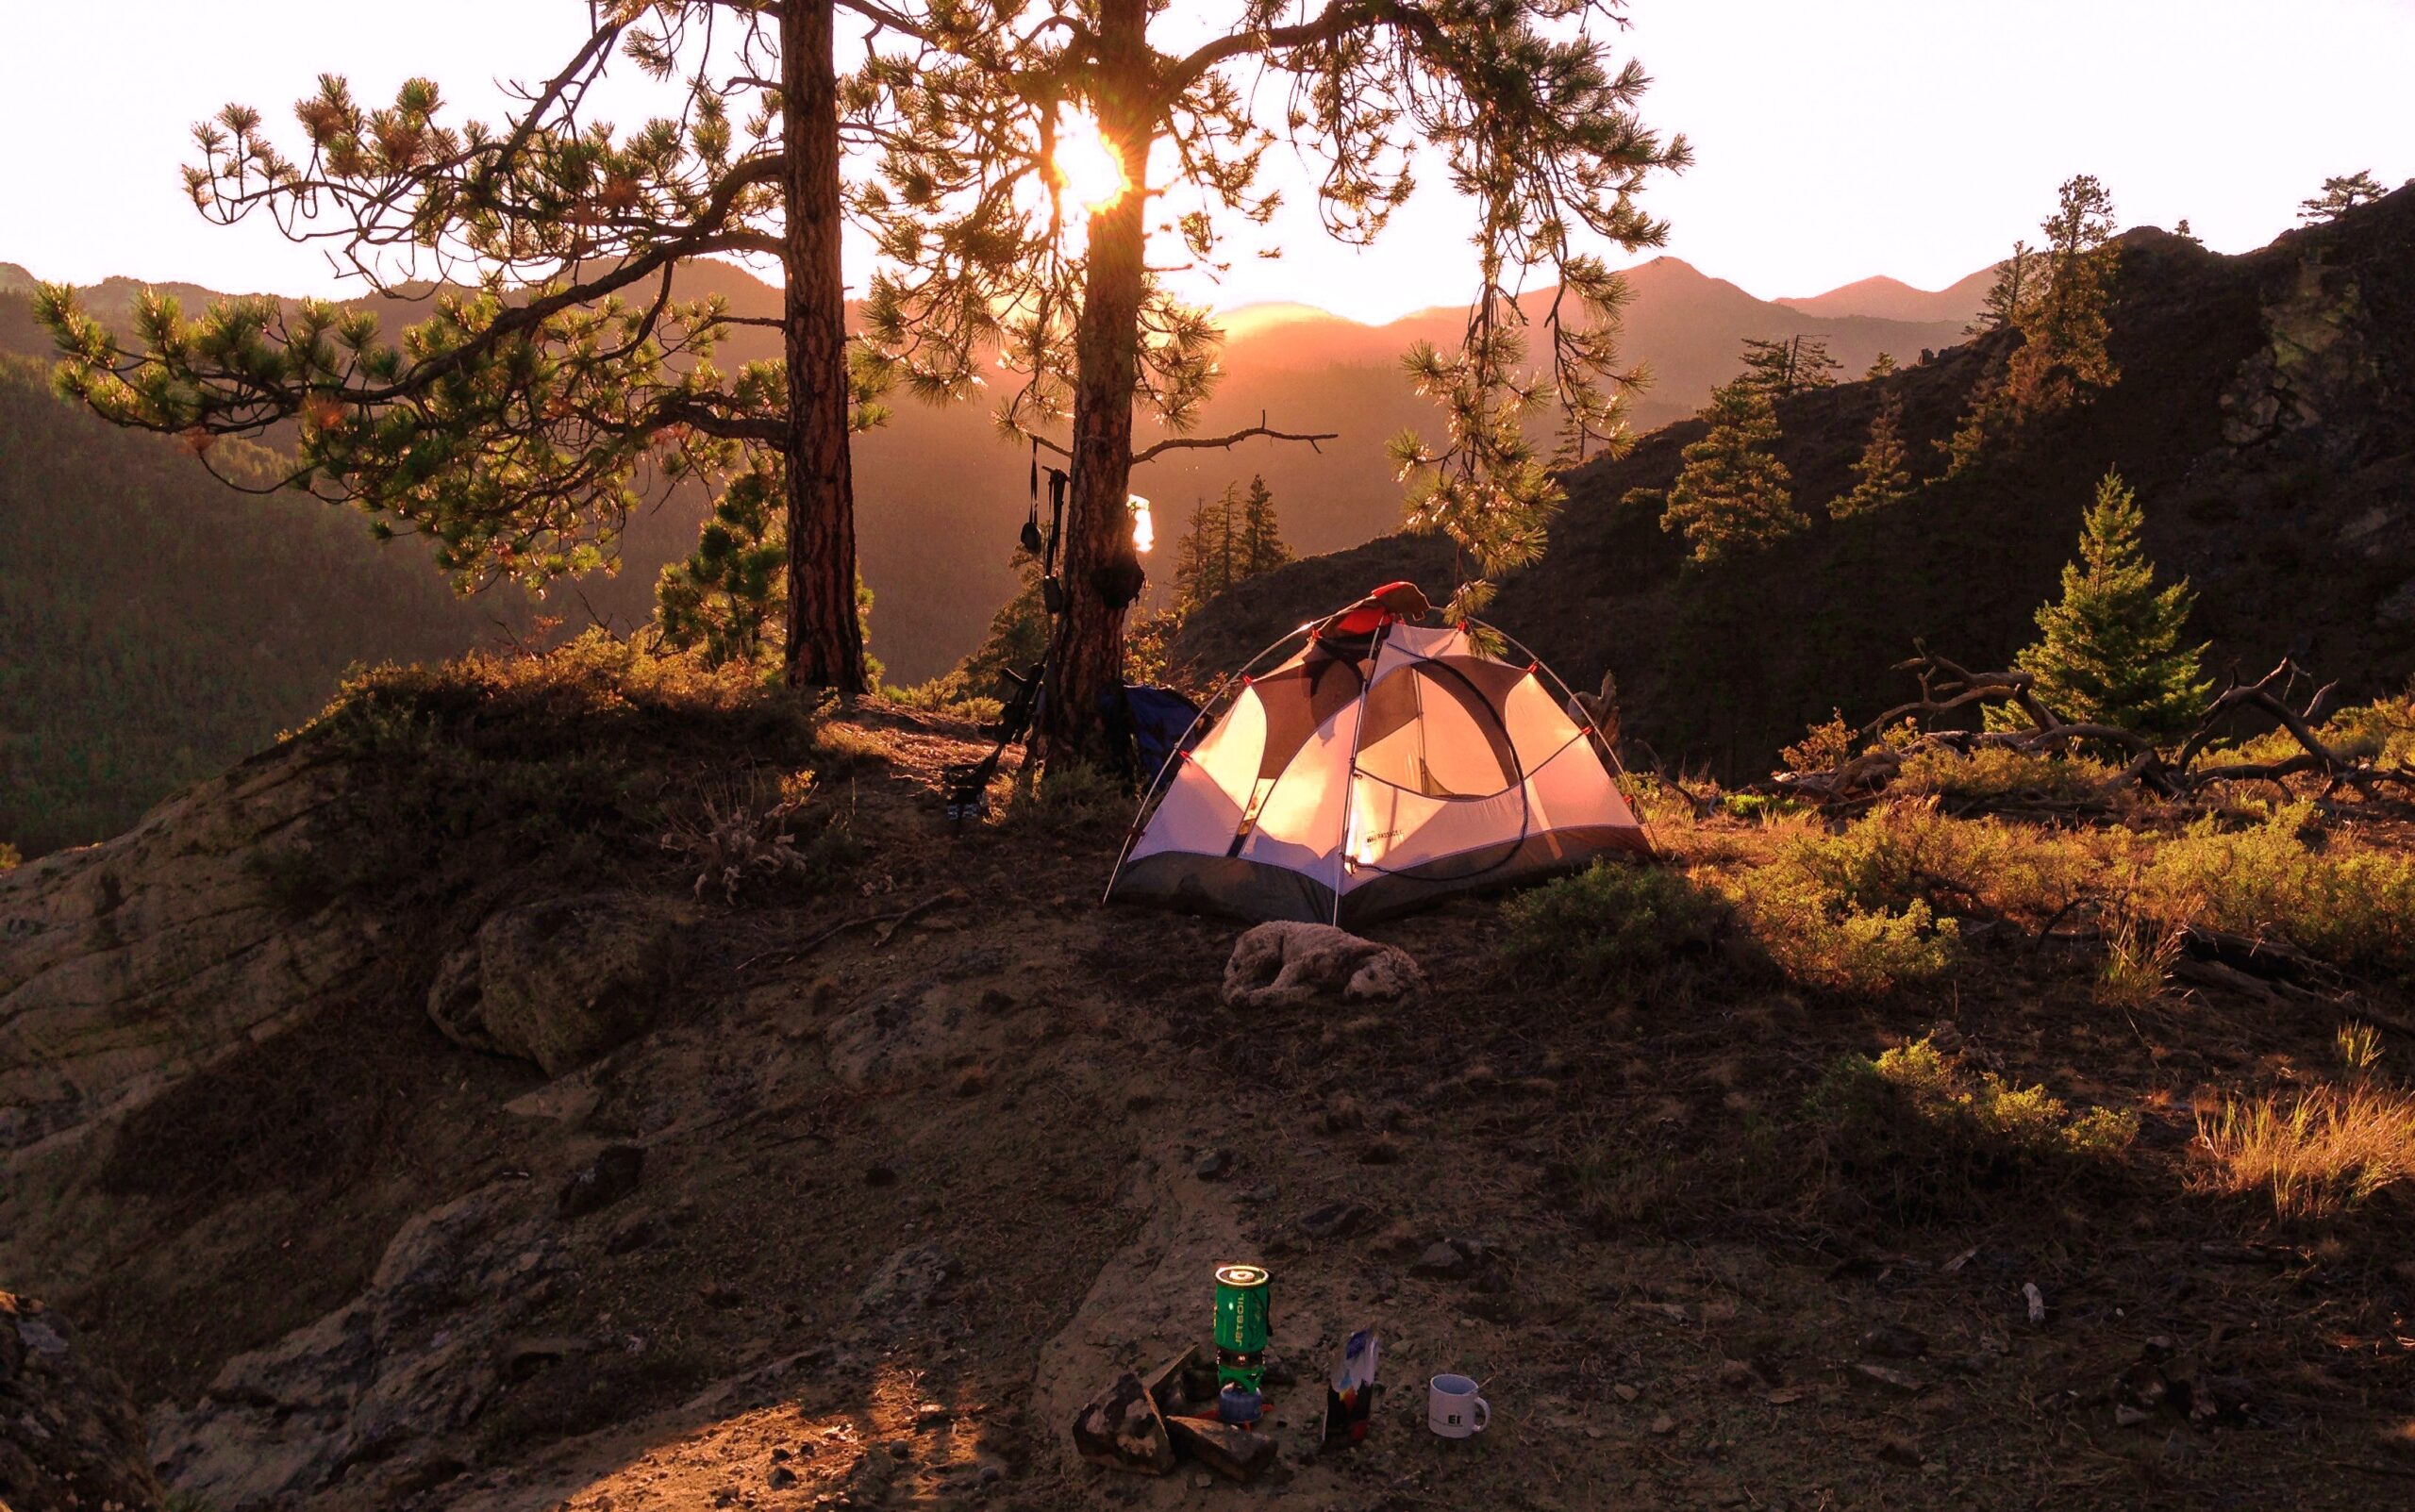 Choosing the Right Campsite: Tips for Finding the Perfect Spot